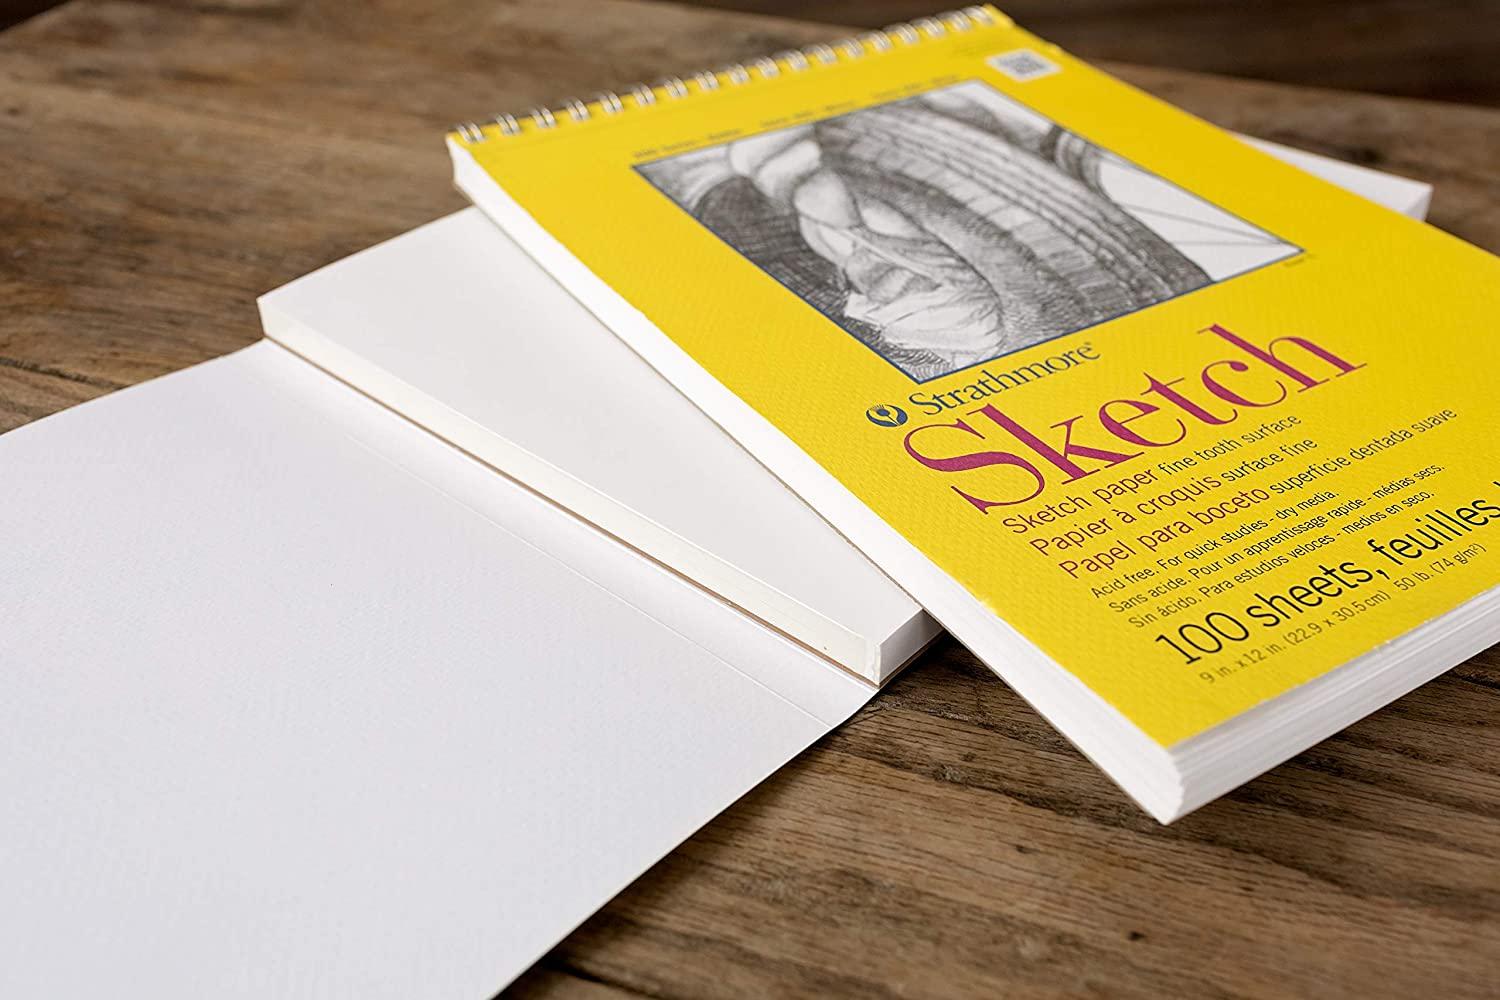 Strathmore 400 Series 5.5 x 8.5 Sketch Paper, 100 Sheets